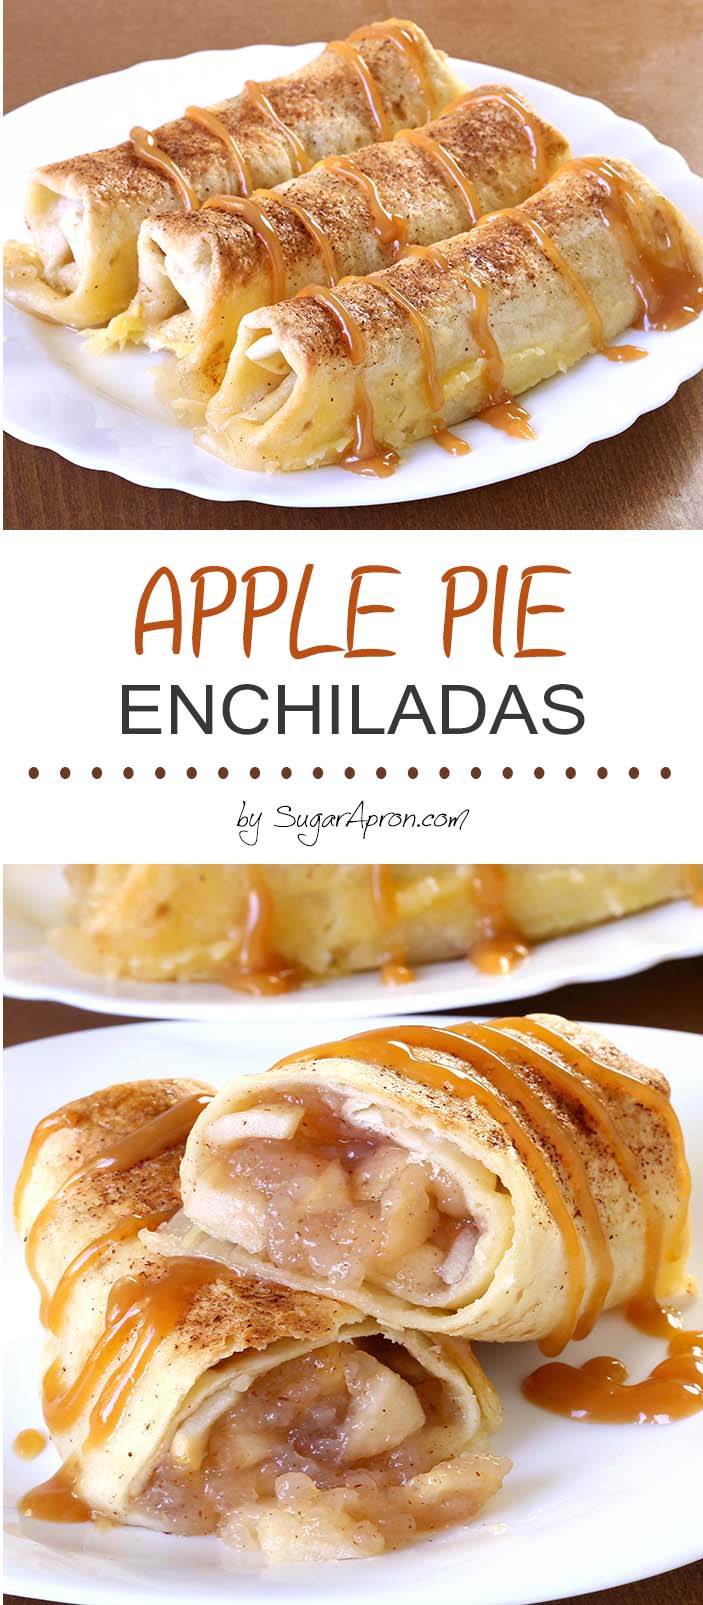 Baked Apple Pie Enchiladas give you all the cinnamony goodness of hot apple pie stuffed securely into a tortilla and drizzled with caramel sauce...